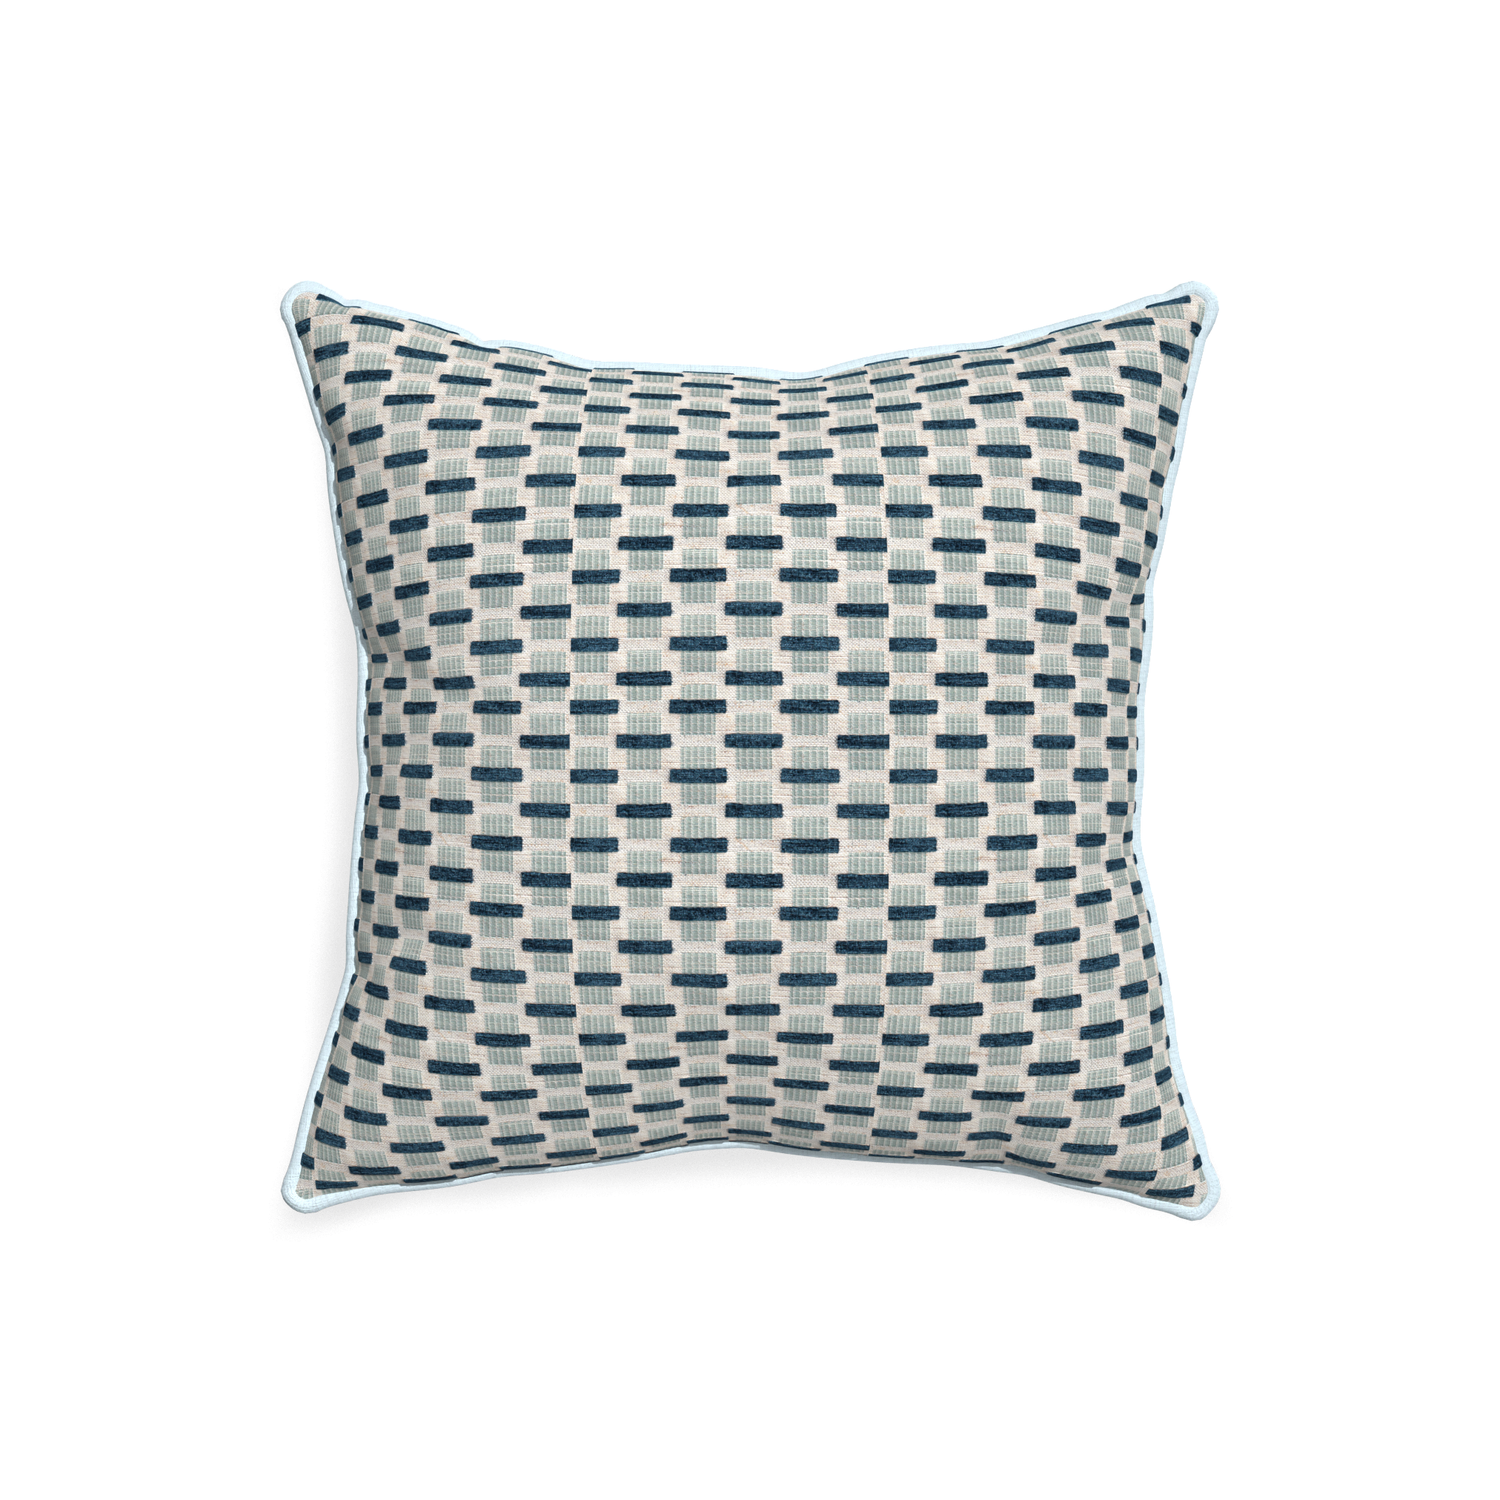 20-square willow amalfi custom blue geometric chenillepillow with powder piping on white background